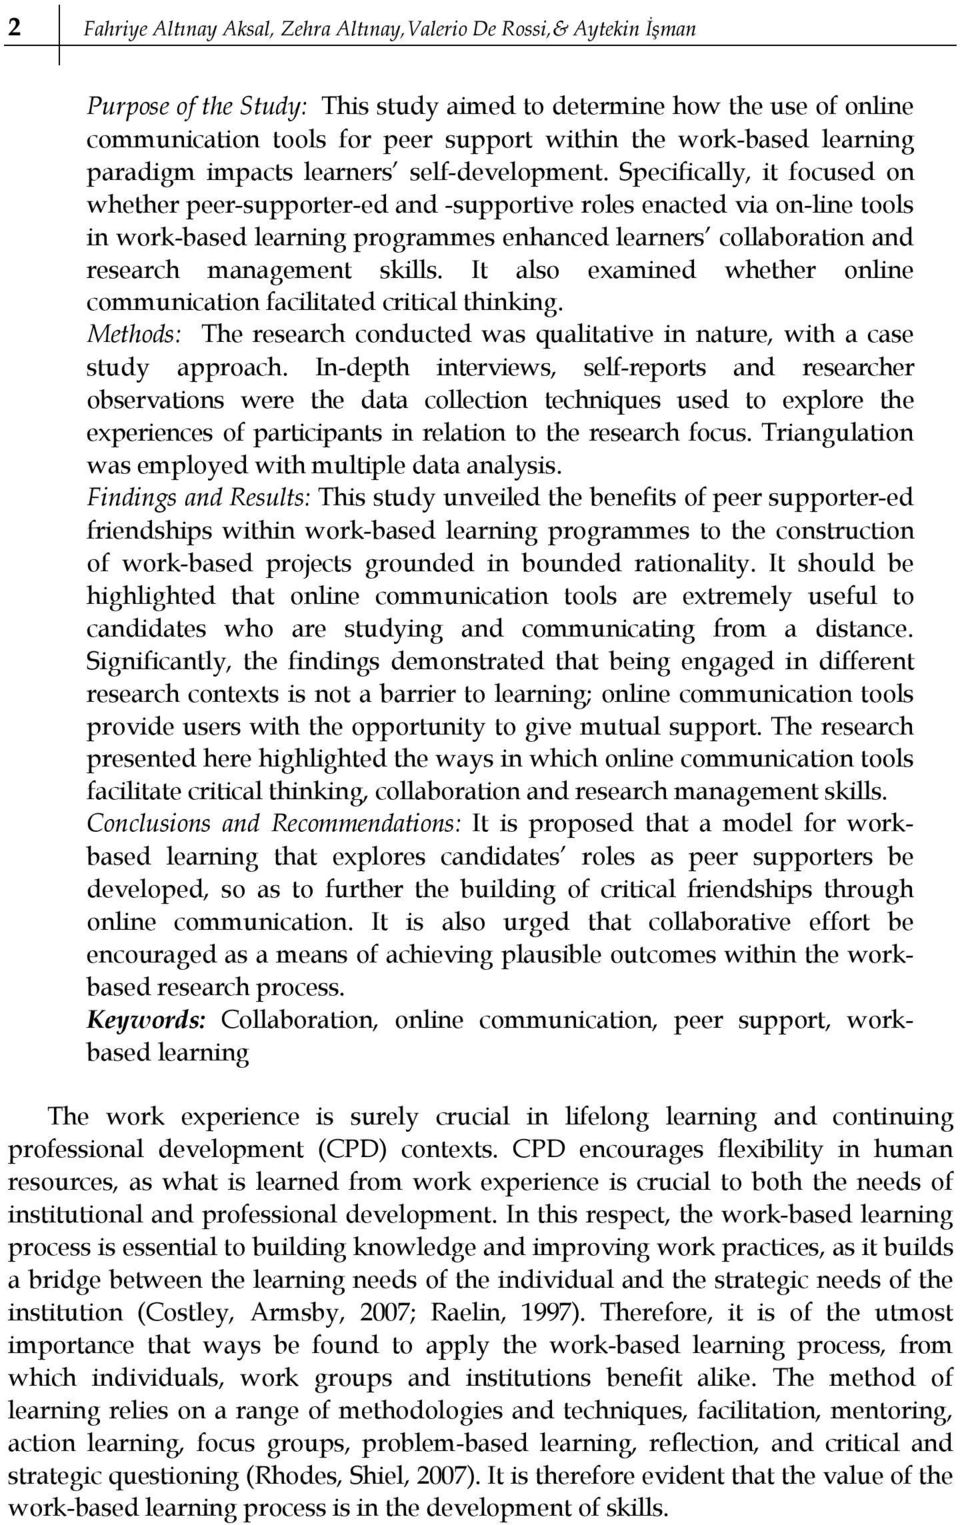 Specifically, it focused on whether peer-supporter-ed and -supportive roles enacted via on-line tools in work-based learning programmes enhanced learners collaboration and research management skills.